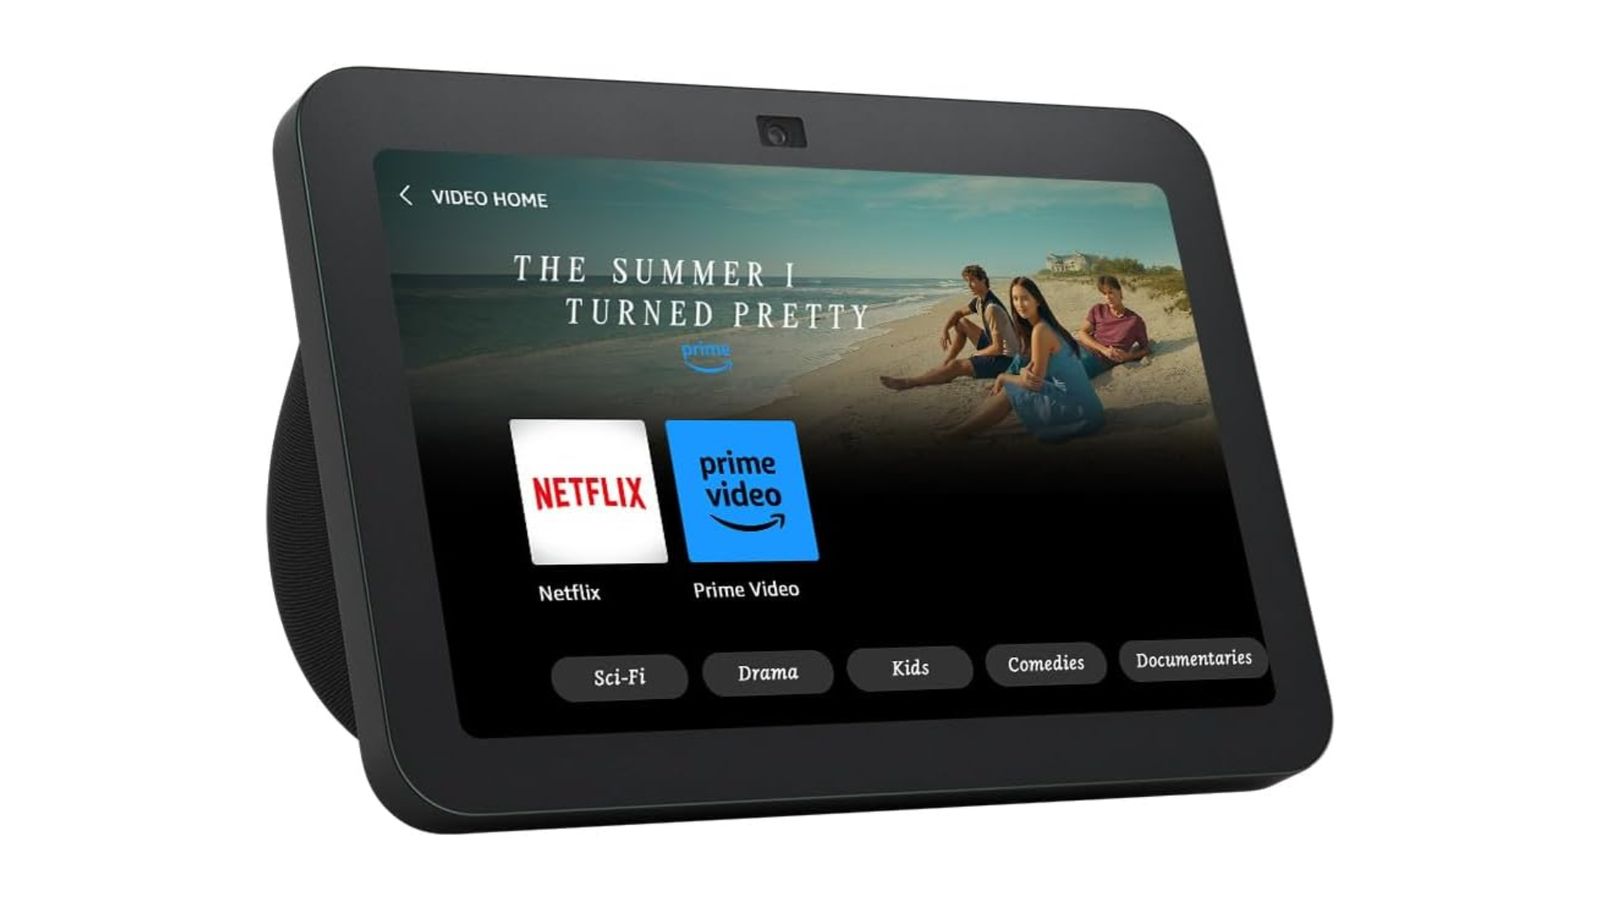 Echo Show 8 product image of a black Amazon assistant with Netflix and Prime app logos on the display.